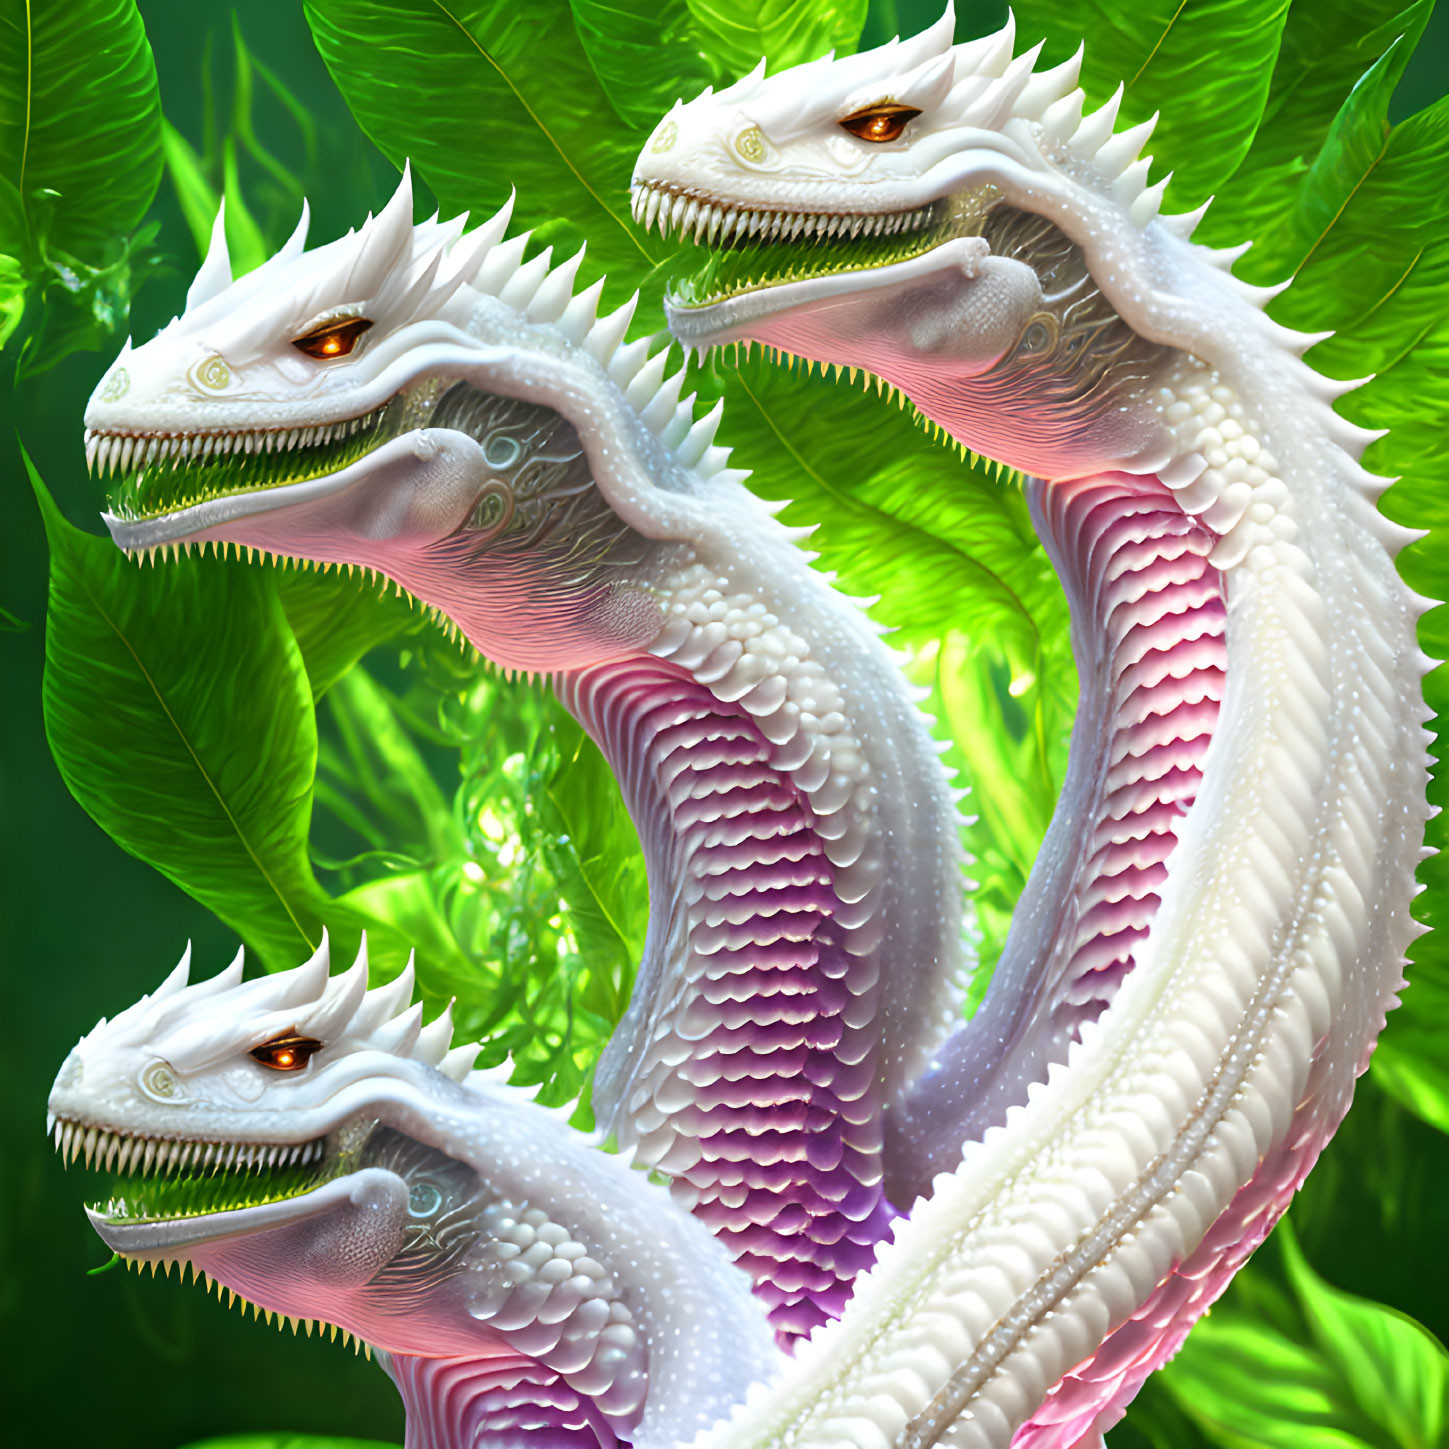 Detailed Three-Headed Dragon Illustration in White Scales Among Green Foliage